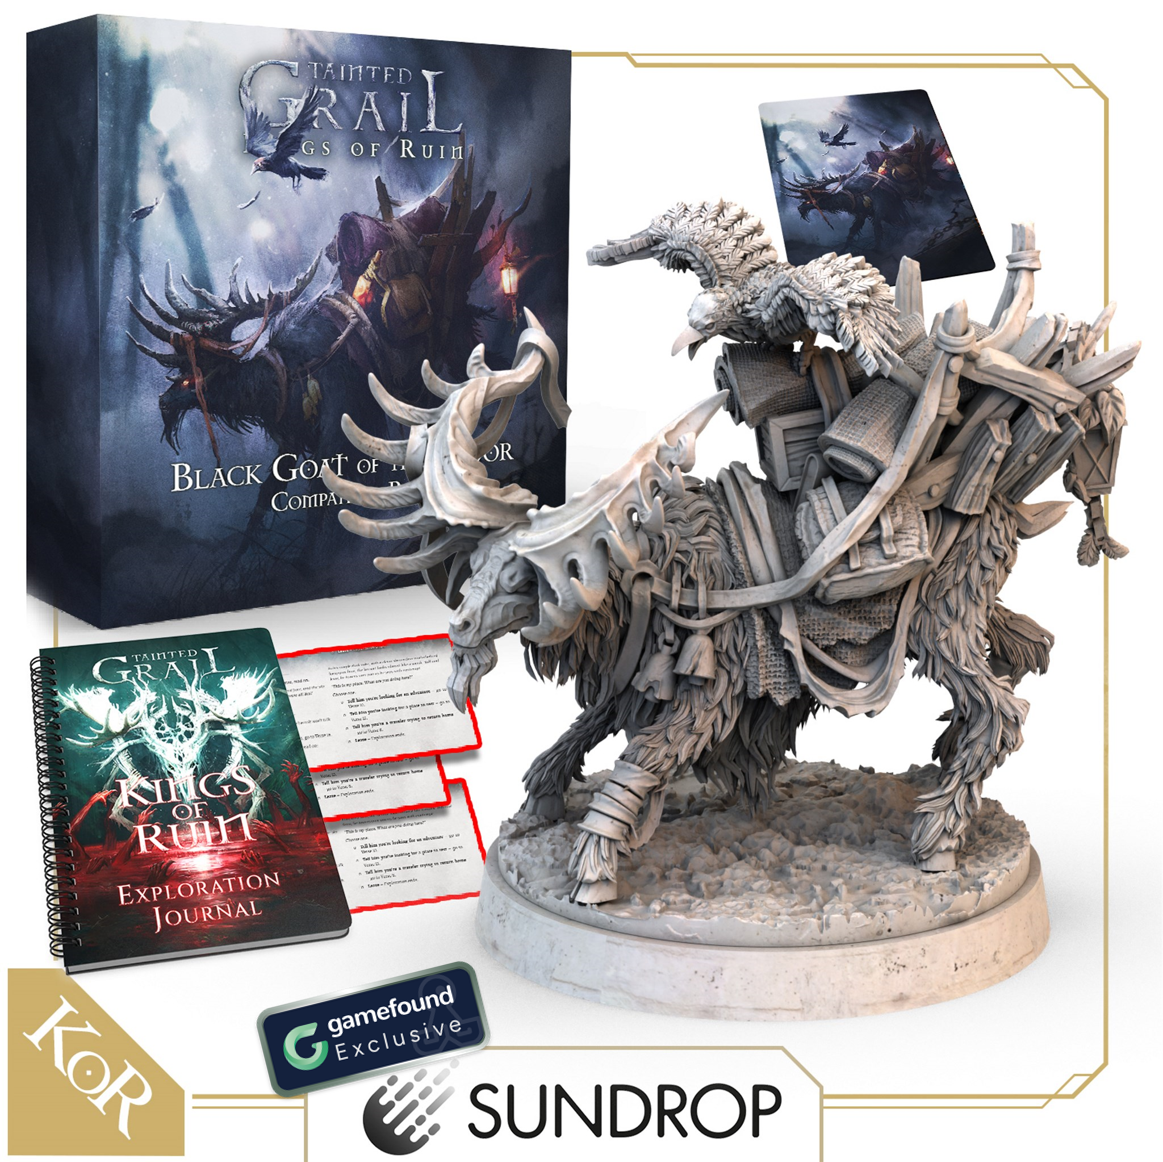 Gamefound Exclusive Tainted Grail: Kings of Ruin Black Goat of The Moors Expansion, Sundrop Edition